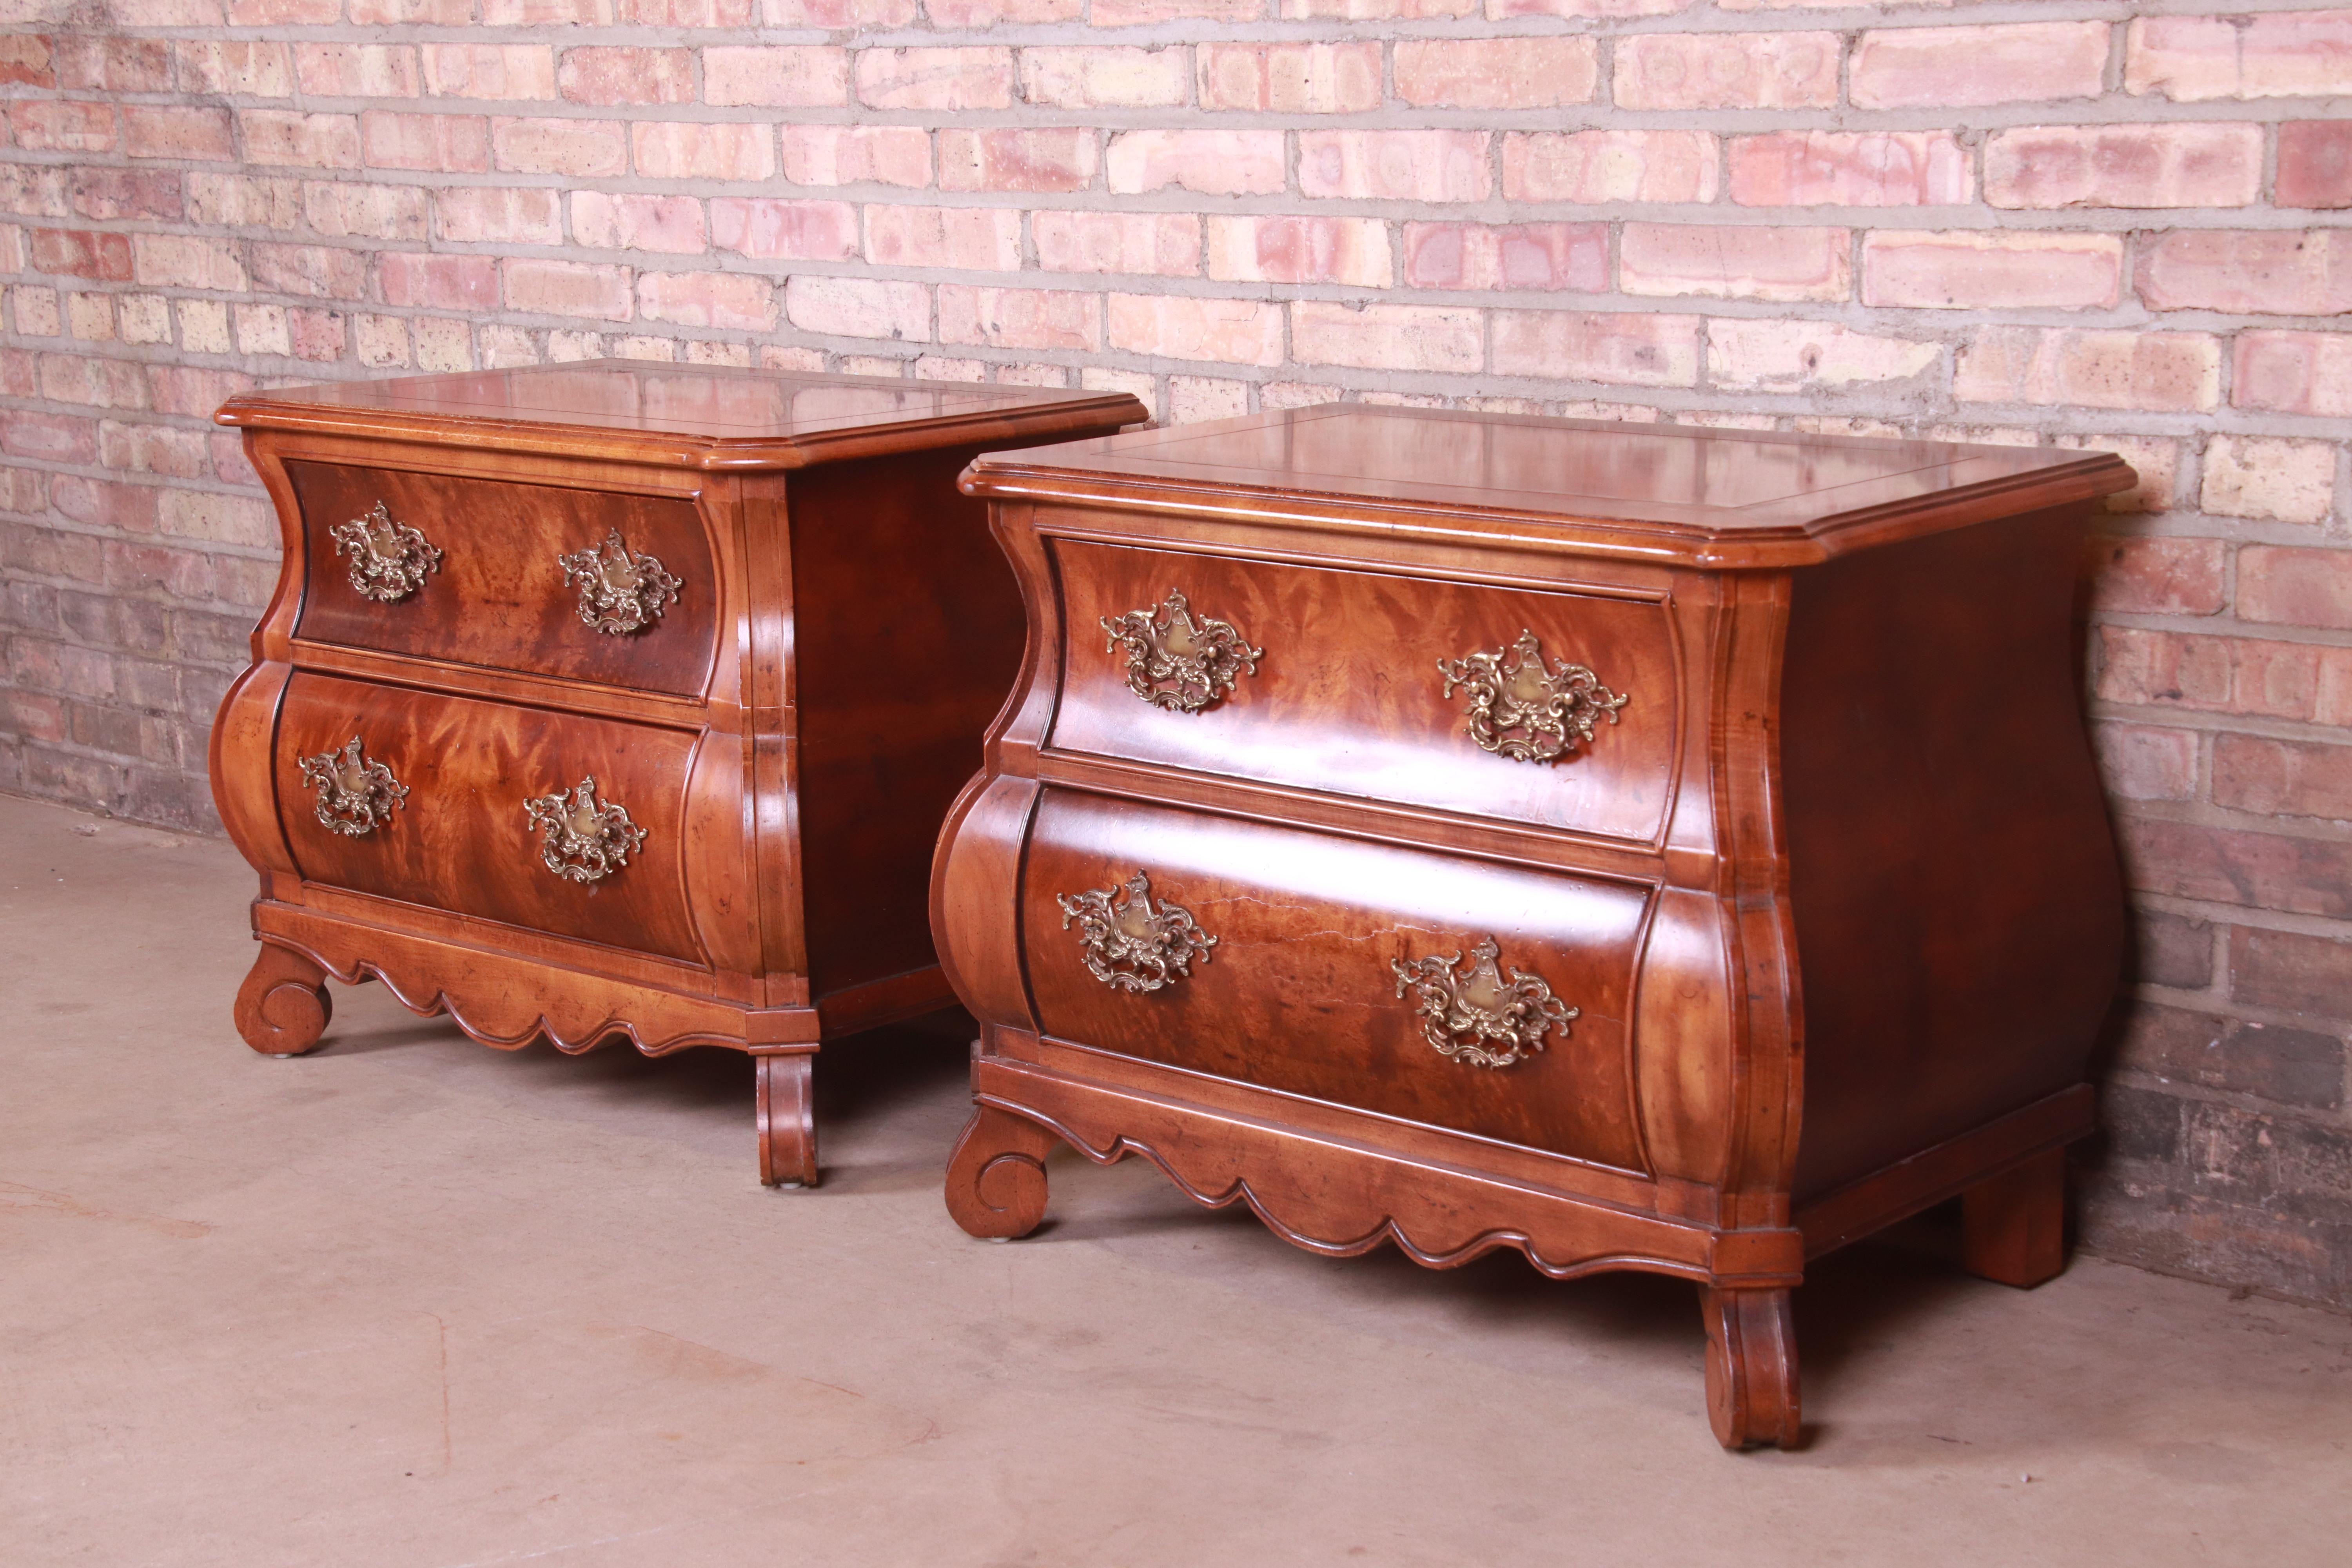 French Provincial Henredon Italian Provincial Bombay Form Burled Walnut Nightstands, Pair